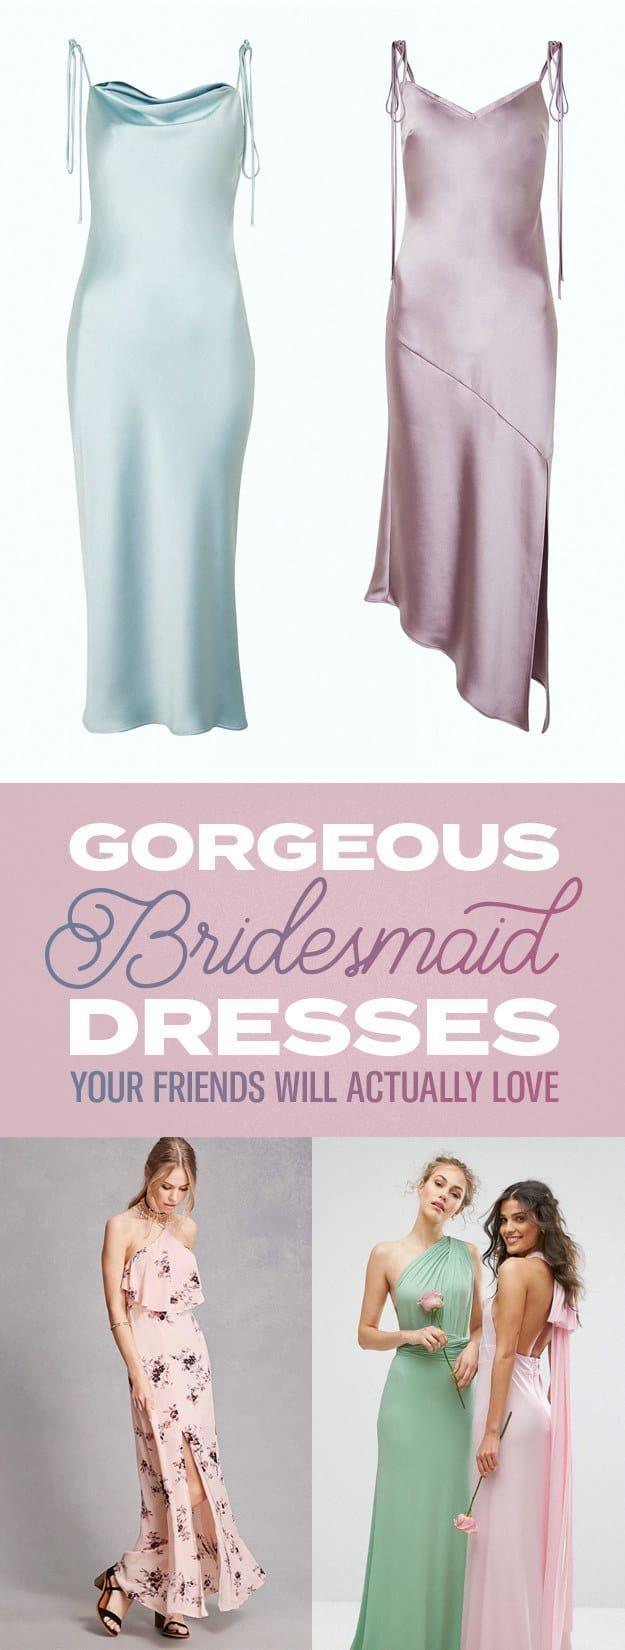 Hochzeit - 33 Gorgeous Bridesmaid Dresses Your Friends Will Actually Love